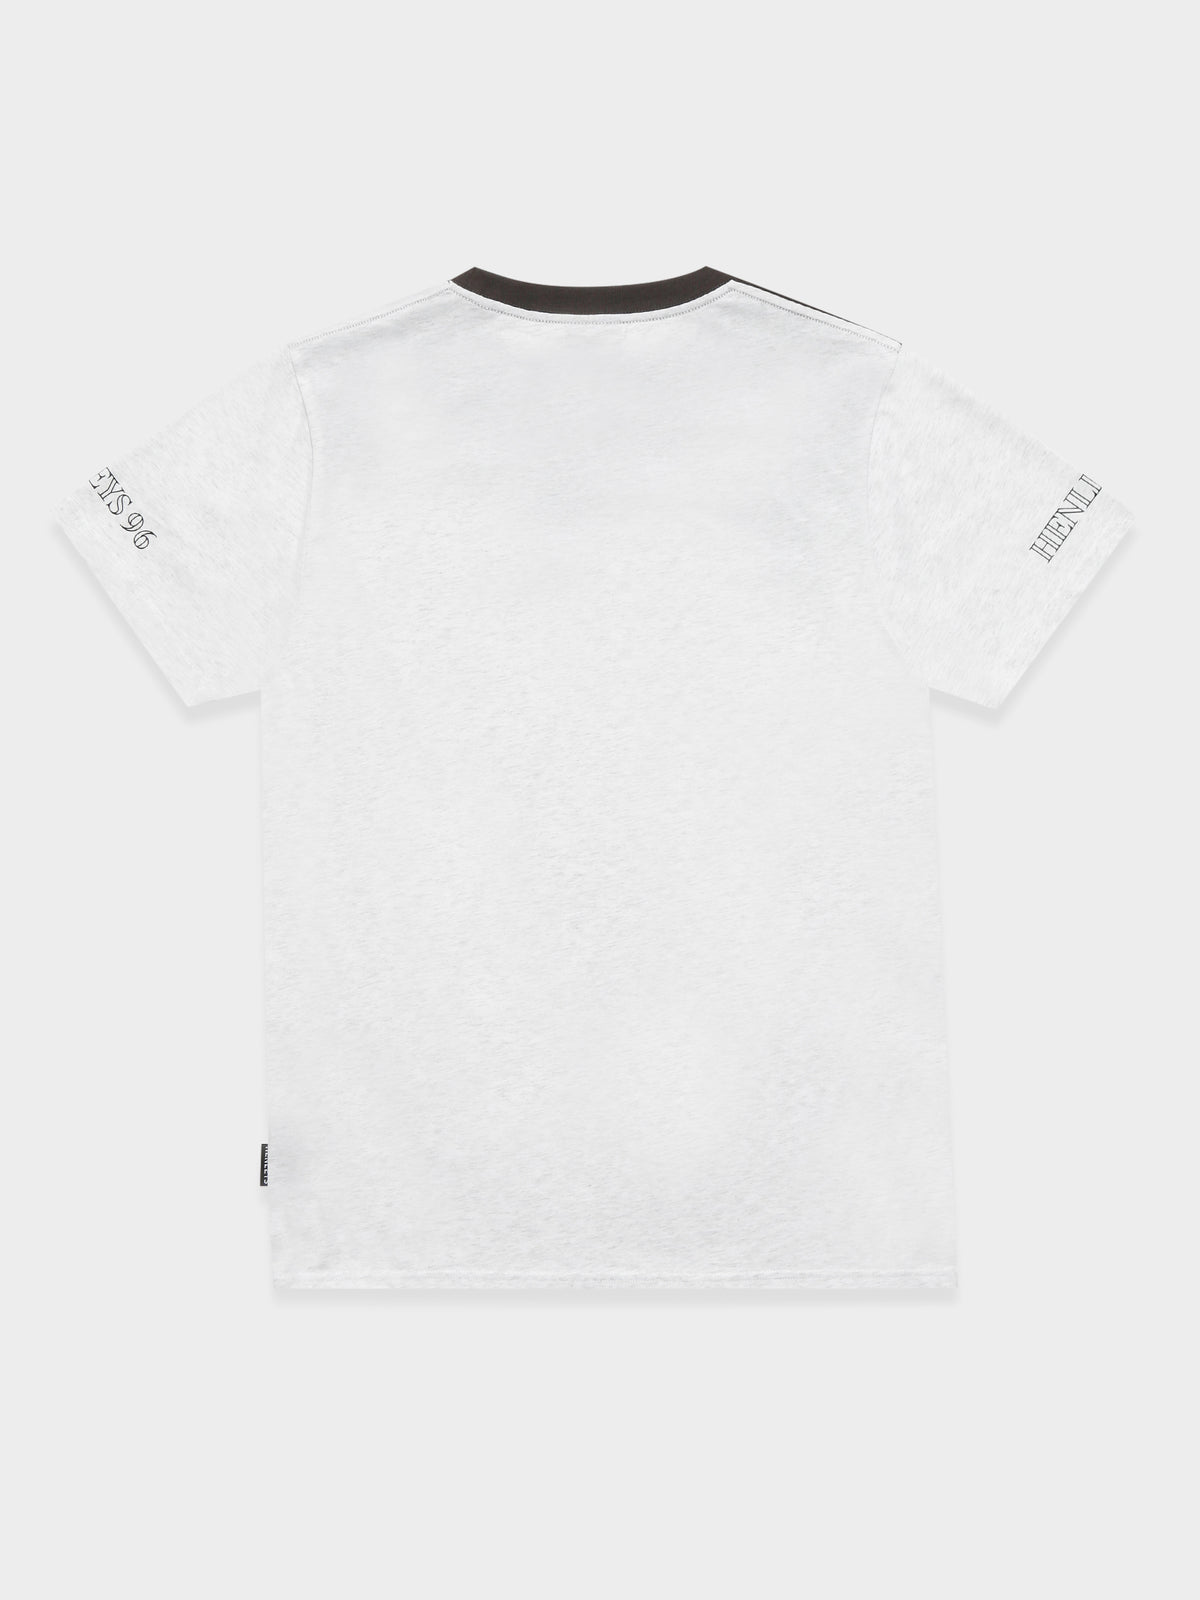 Whistle T-Shirt in Snow Marle